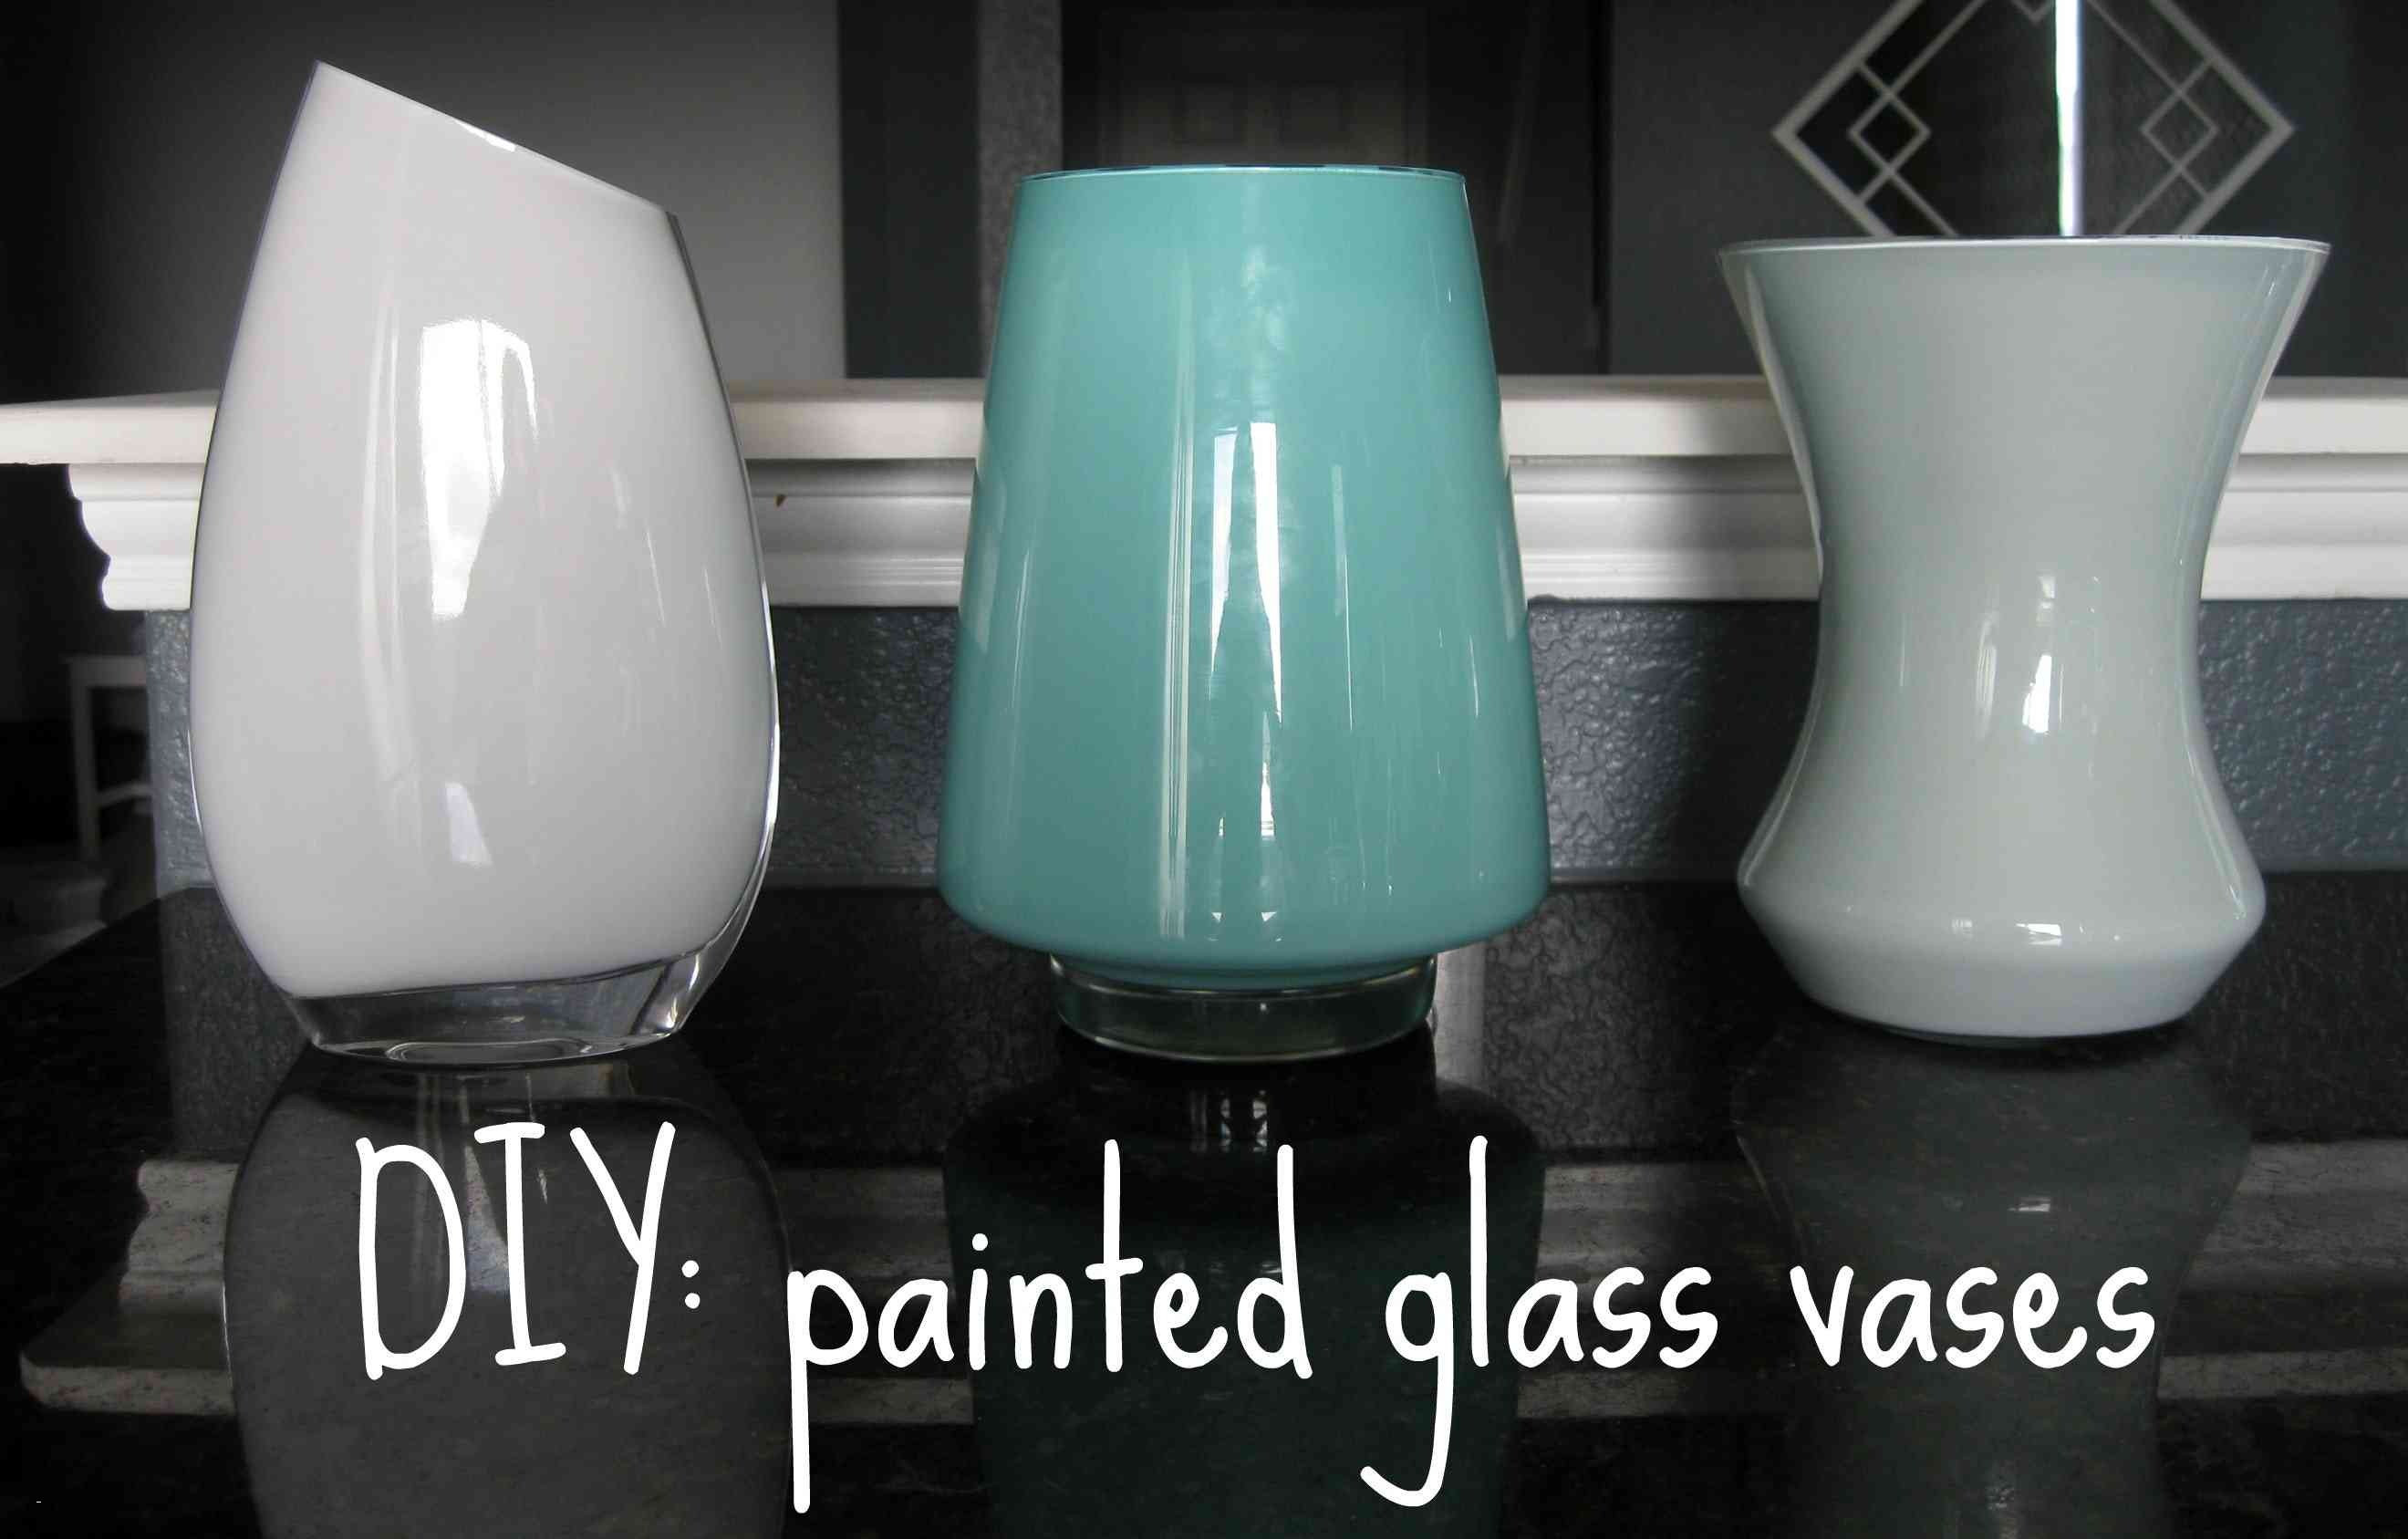 Lime Green Glass Vase Of Light Blue Vase Collection Kitchen Coloring New Inside Paint New H Inside Kitchen Coloring New Inside Paint New H Vases Paint Vase I 0d with Bunch Od Red and Yellow